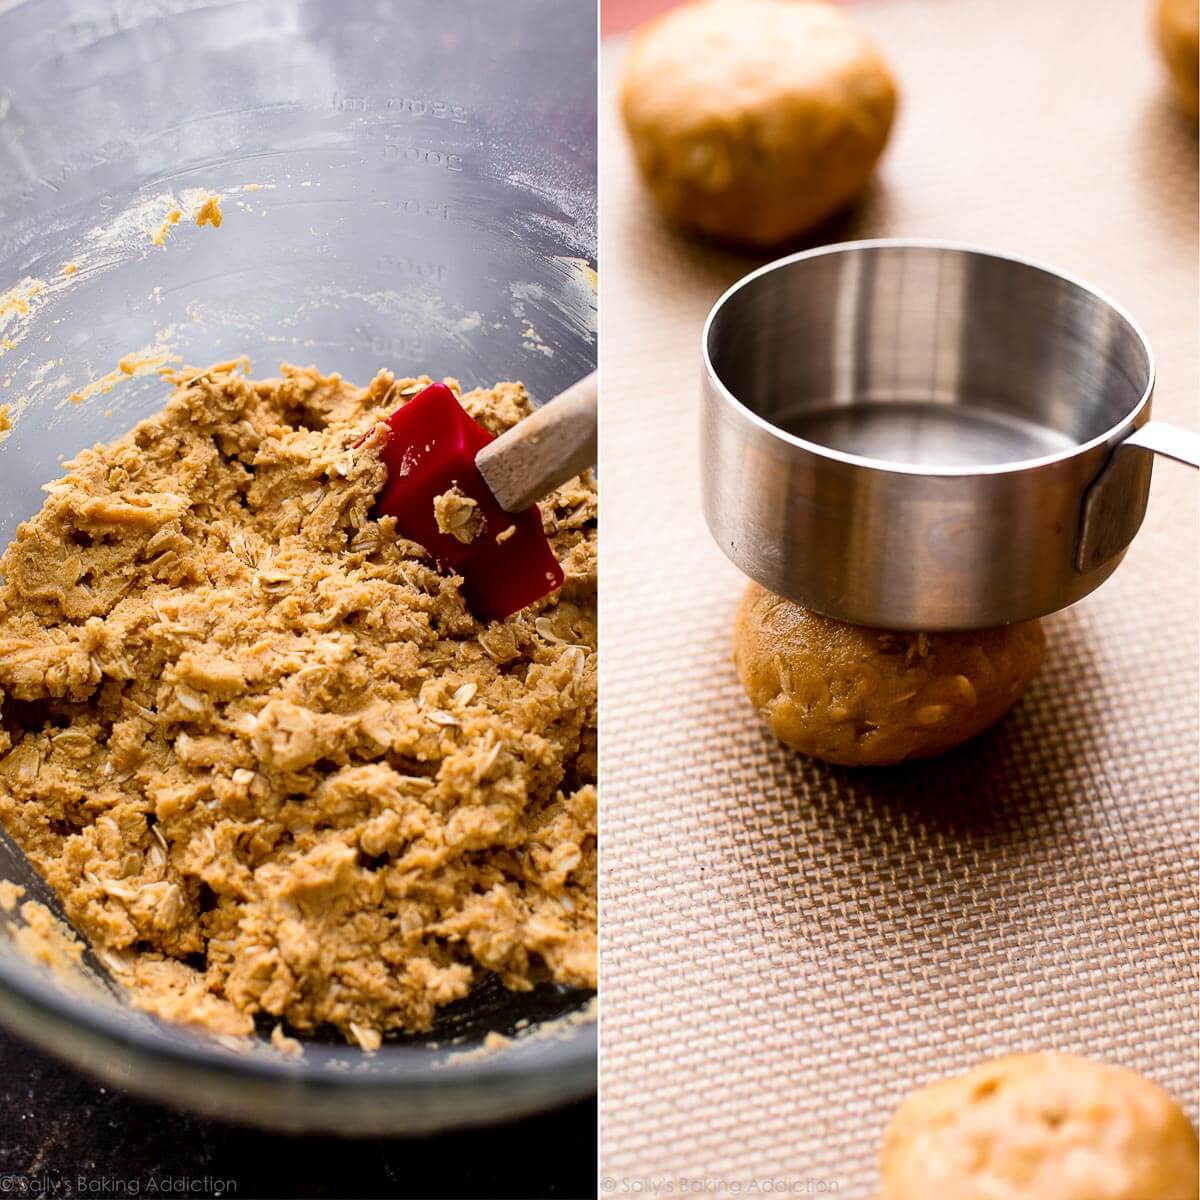 2 images of peanut butter cookie dough in a glass bowl and pressing down a peanut butter cookie dough ball with a measuring cup